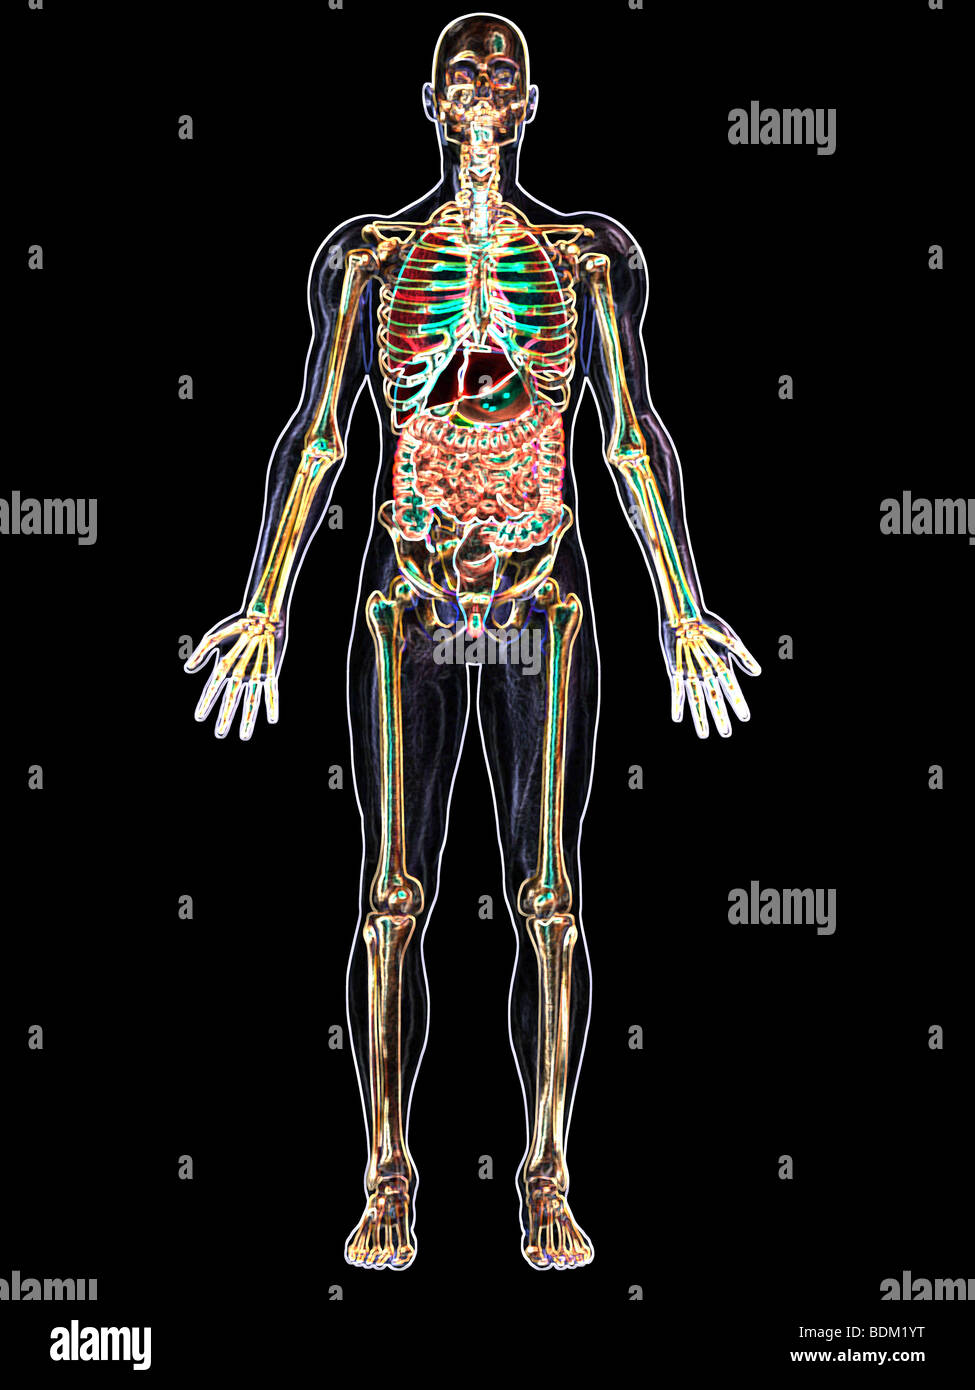 human anatomical illustration of an adult man, showing the skeleton, lungs, liver, gallbladder, stomach, pancreas and appendix Stock Photo